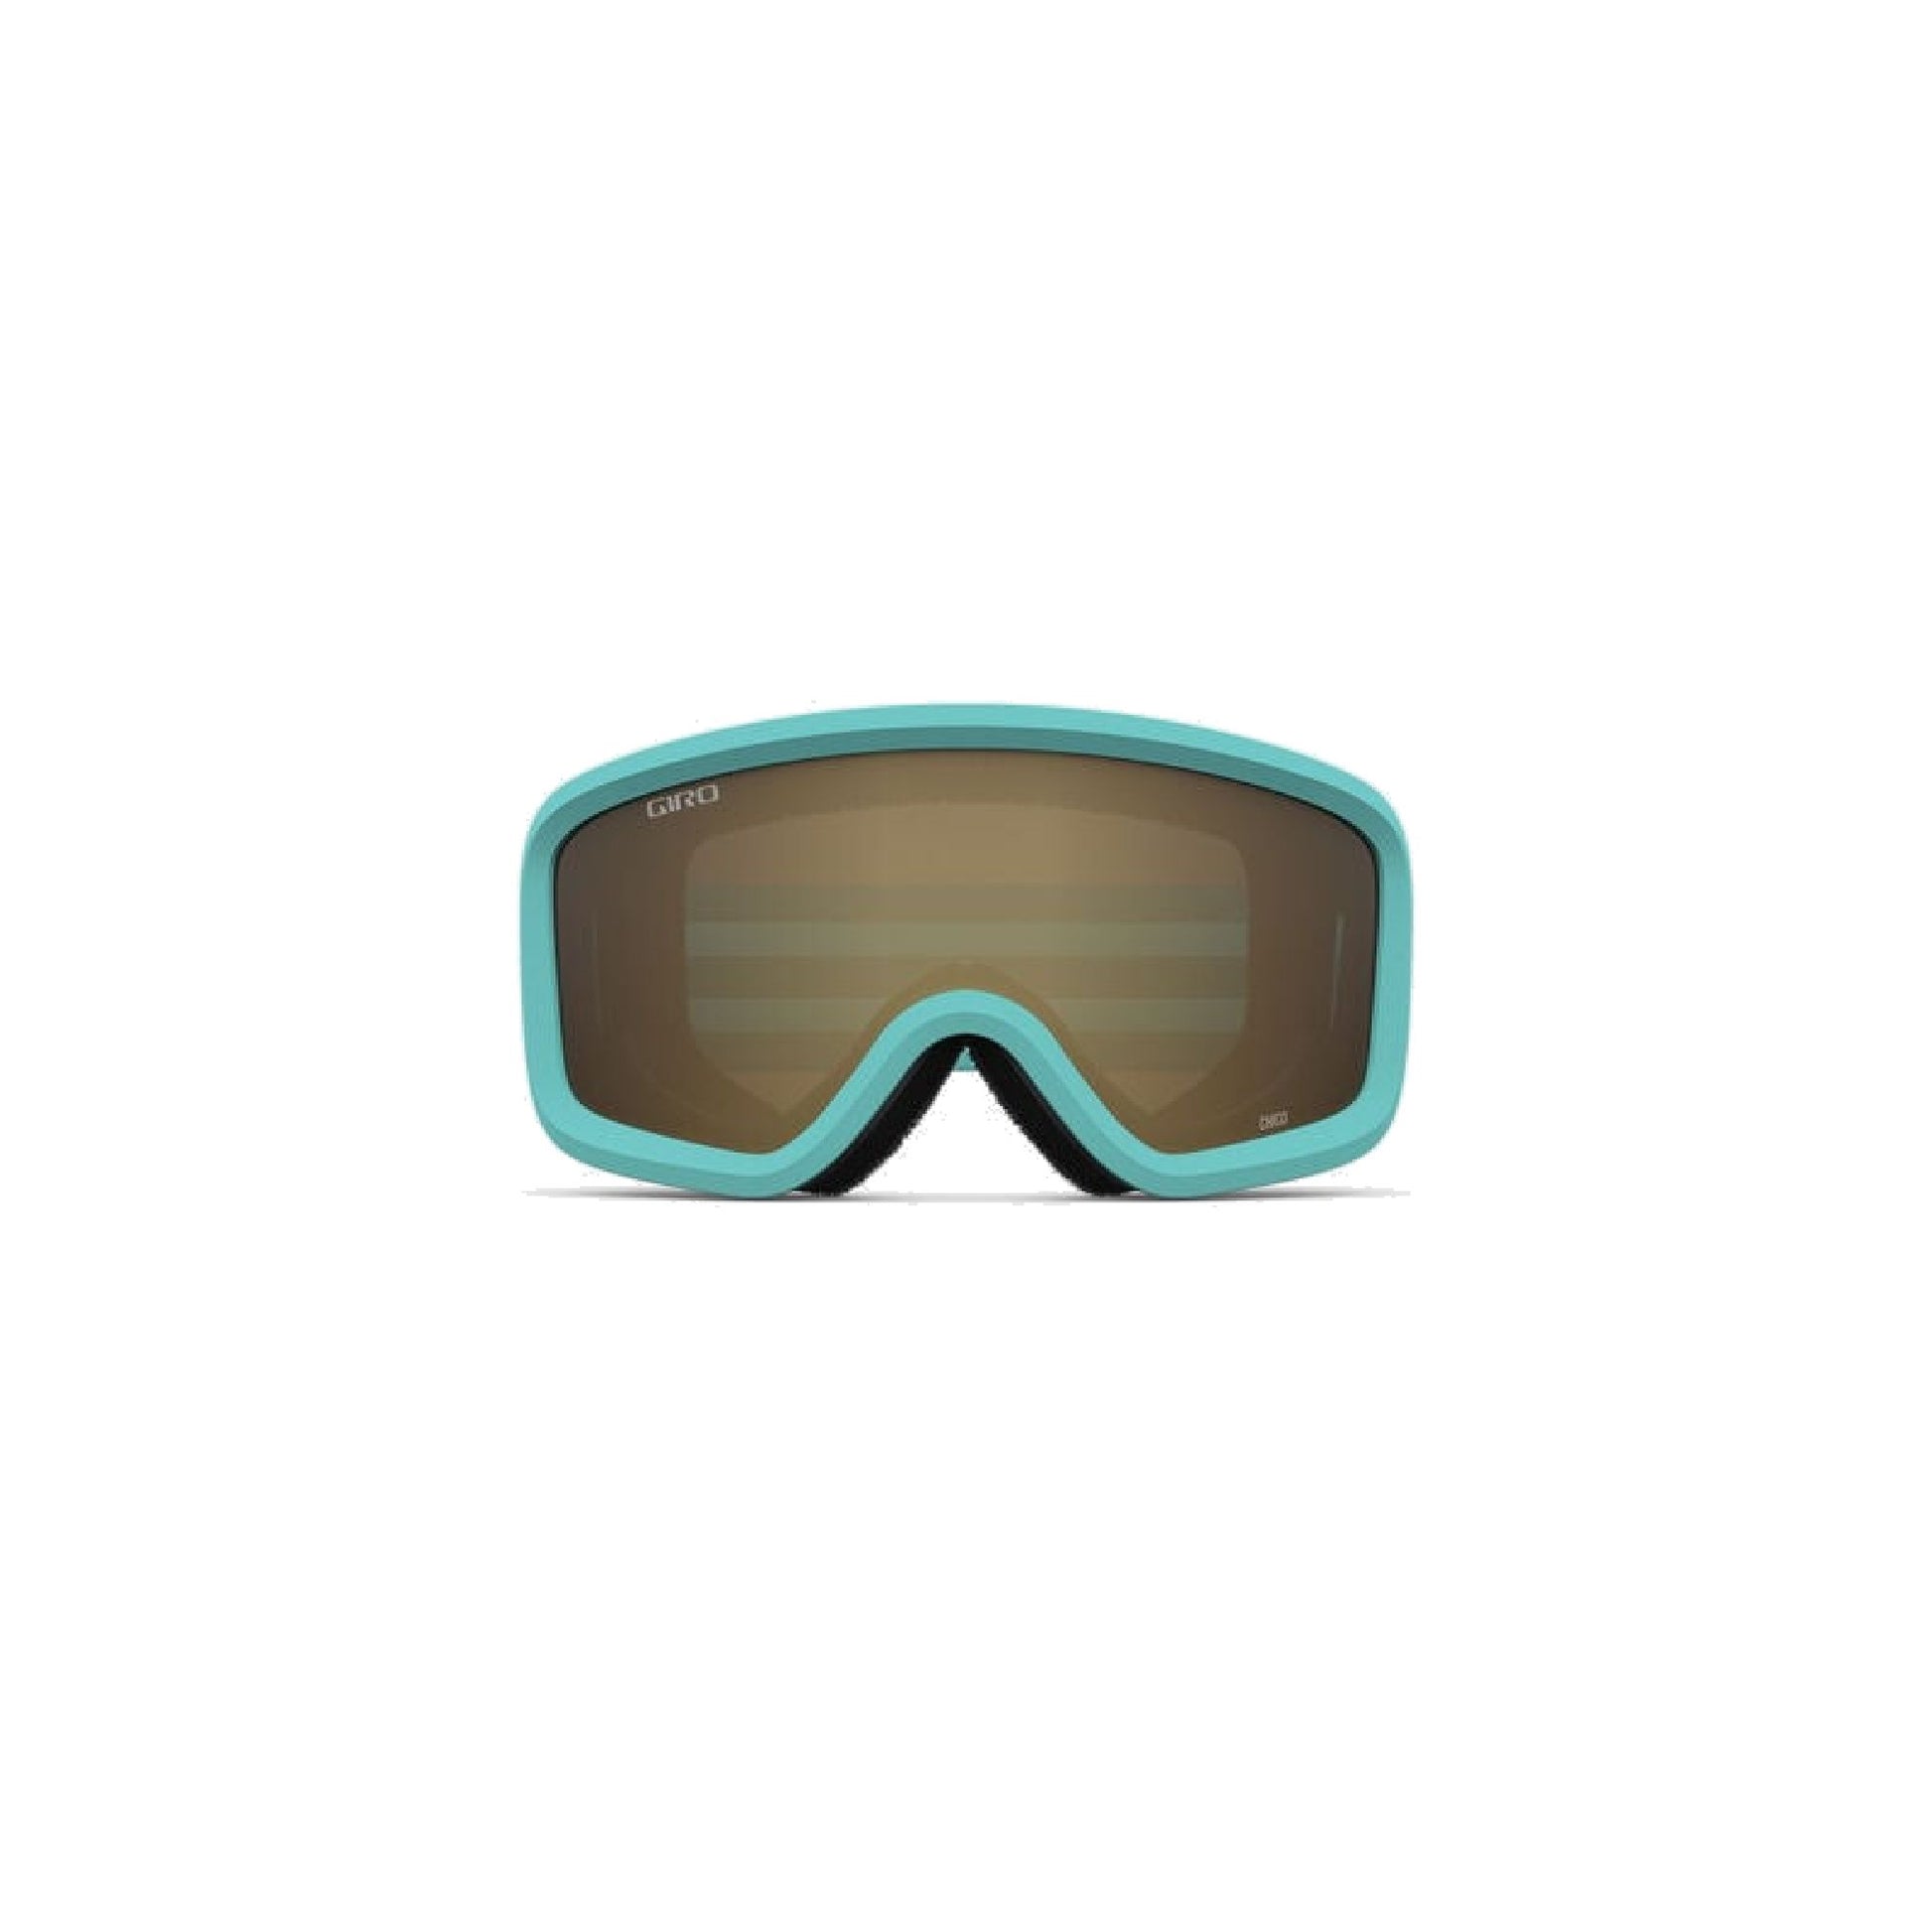 Giro Youth Chico 2.0 Snow Goggles Screaming Teal Chroma Dot Amber Pink Snow Goggles